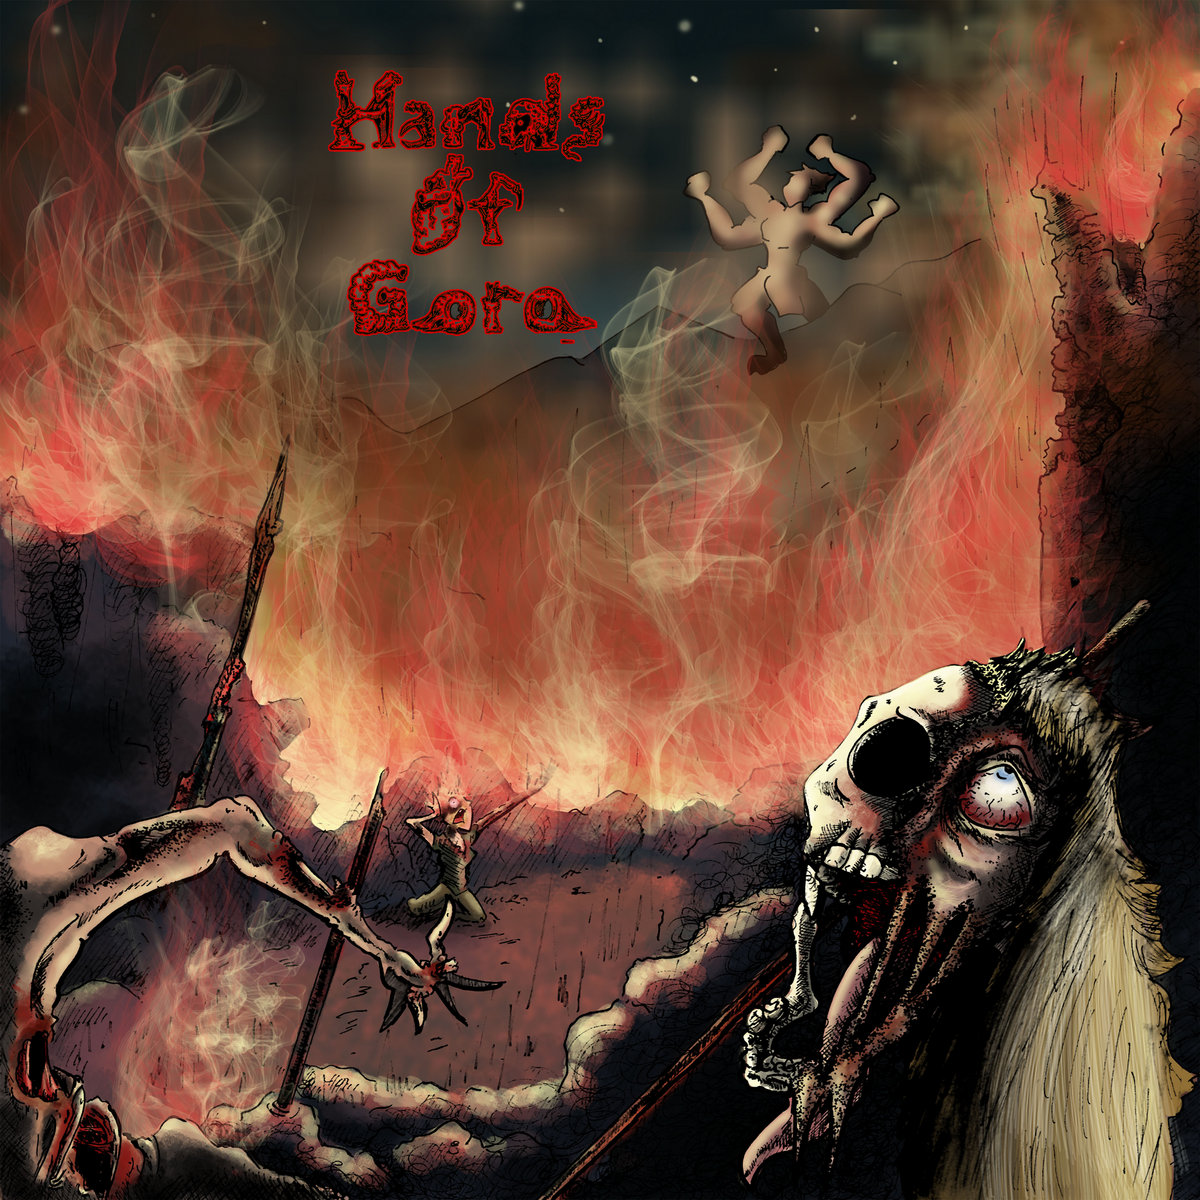 Hands of Goro Claw Their Way to the Edge of Heavy Metal On Self-Titled Debut (Early Album Stream)